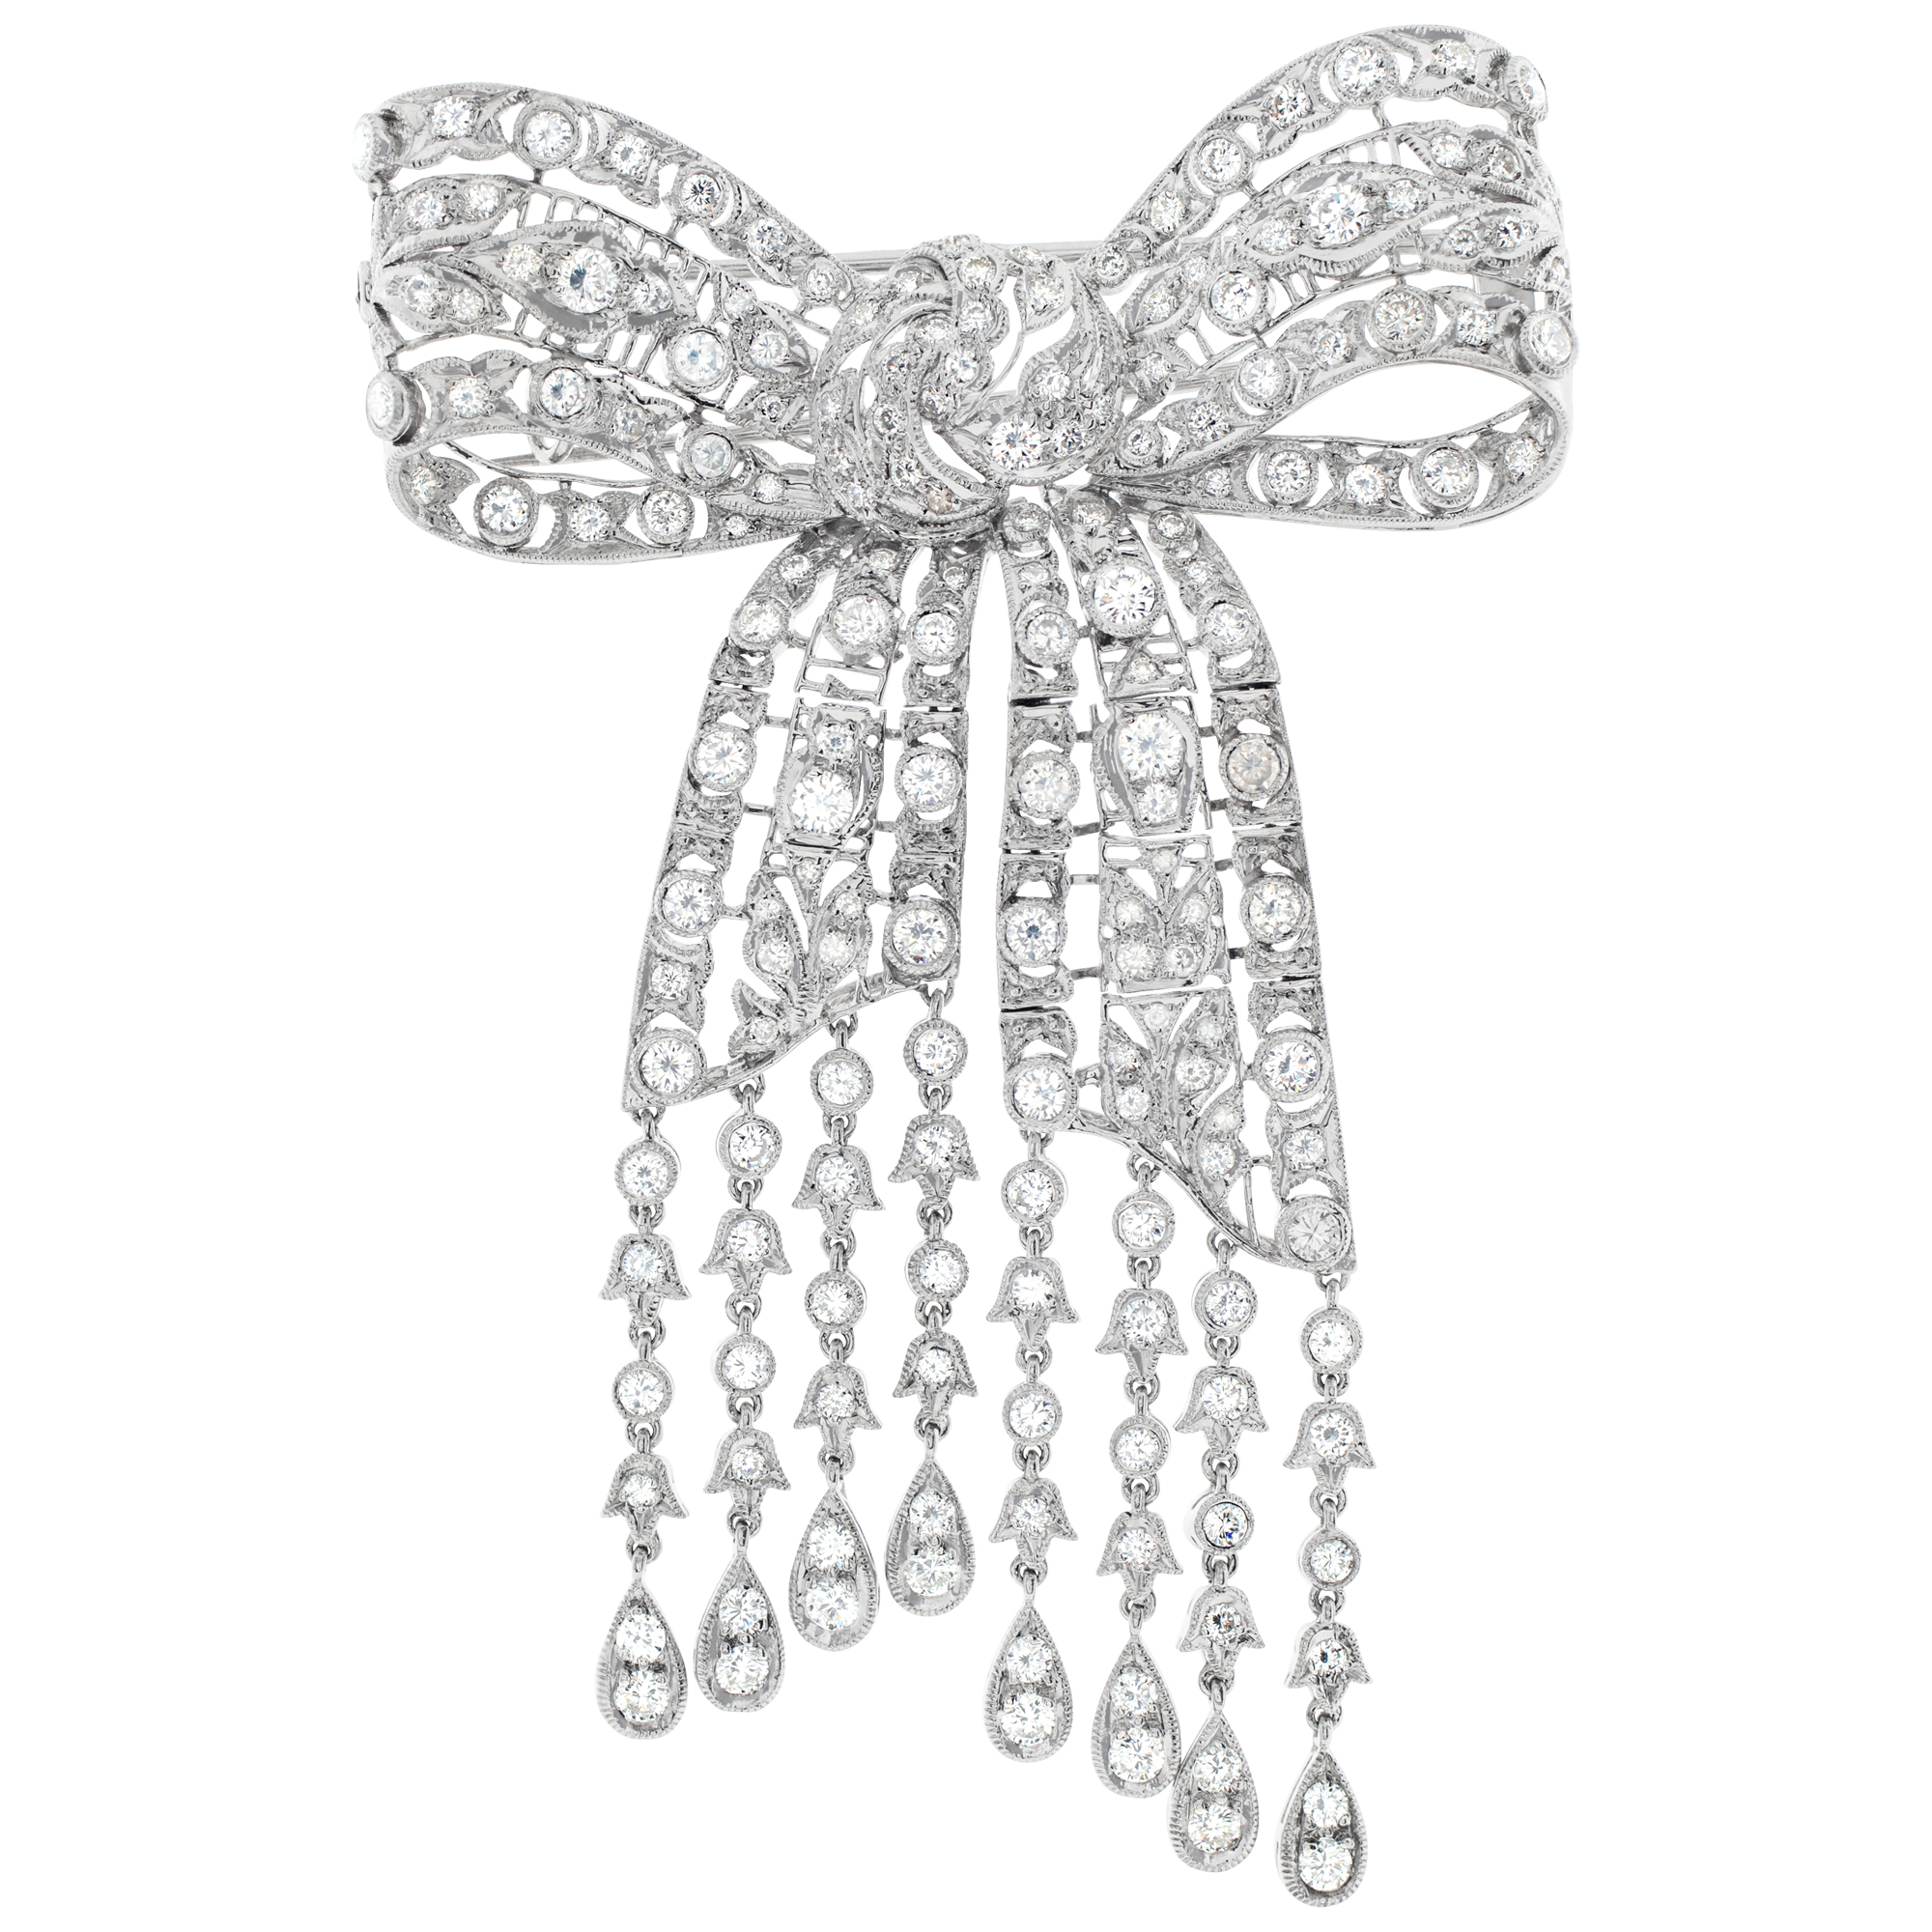 Diamond bow pin/brooch in platinum with total approx. weight over 6.15 carats round brilliant cut diamond